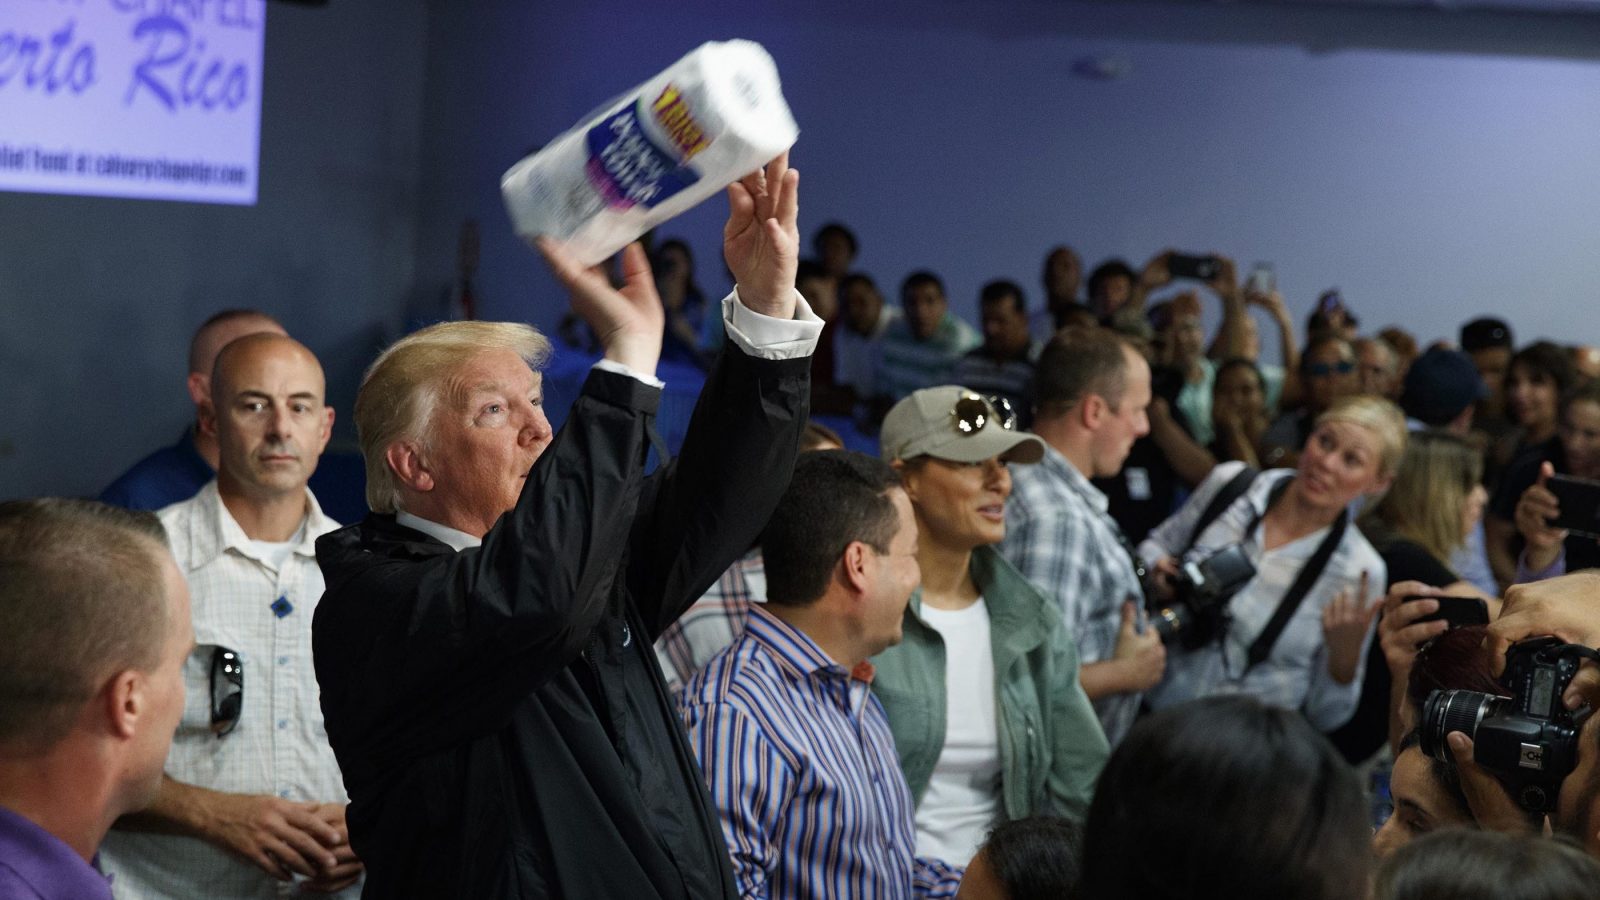 Trump throws a roll of paper towels into the crowd.